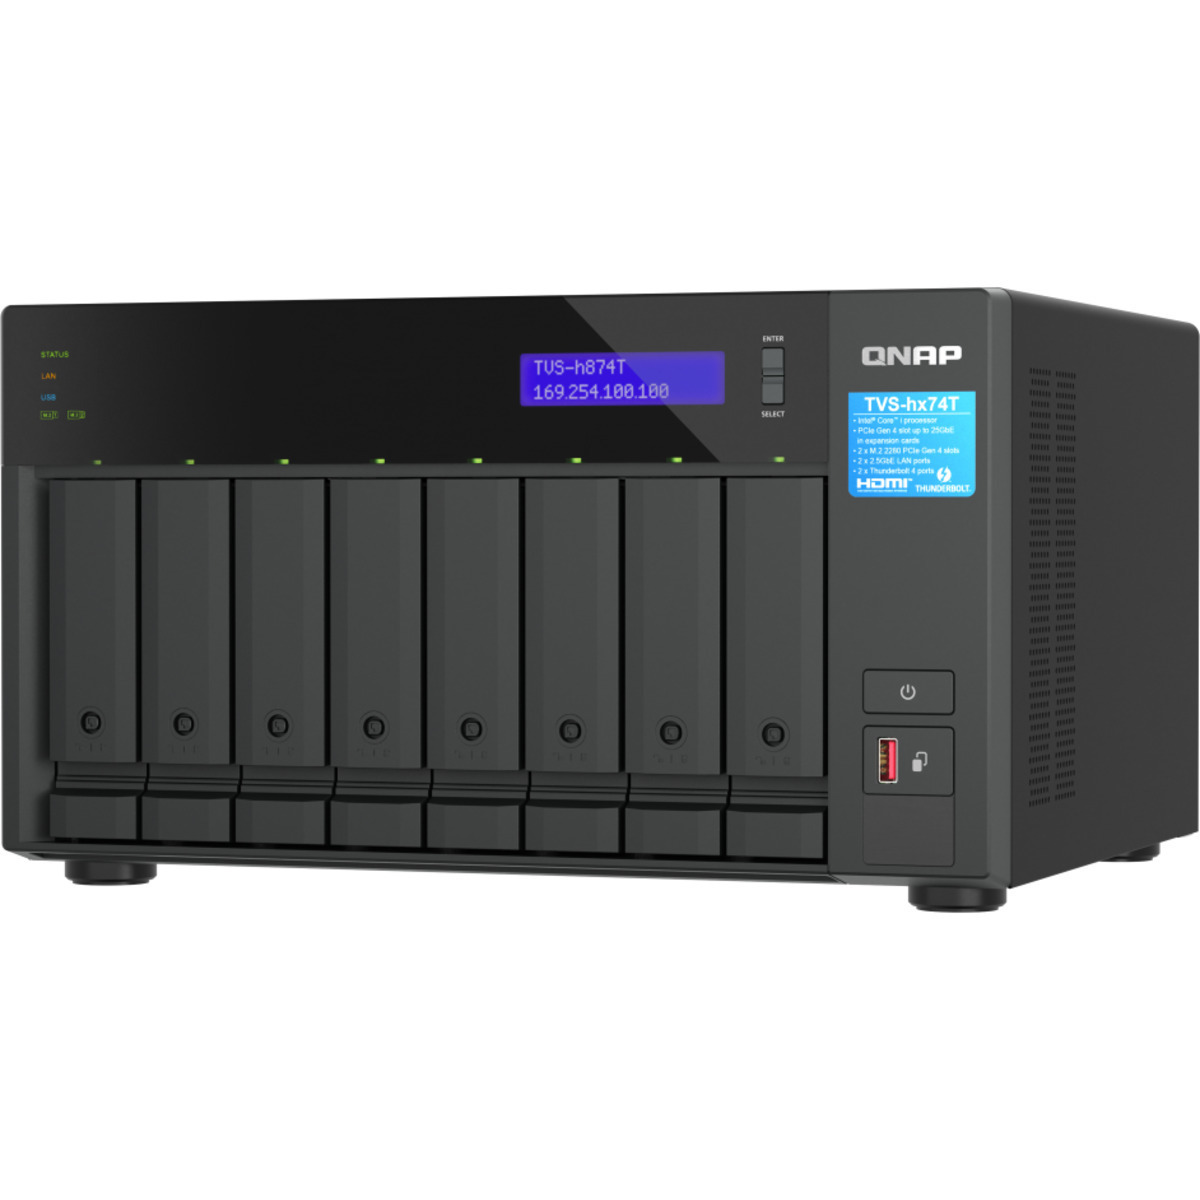 QNAP TVS-h874T Core i7 Thunderbolt 4 112tb 8-Bay Desktop Multimedia / Power User / Business DAS-NAS - Combo Direct + Network Storage Device 8x14tb Western Digital Ultrastar DC HC530 WUH721414ALE6L4 3.5 7200rpm SATA 6Gb/s HDD ENTERPRISE Class Drives Installed - Burn-In Tested TVS-h874T Core i7 Thunderbolt 4